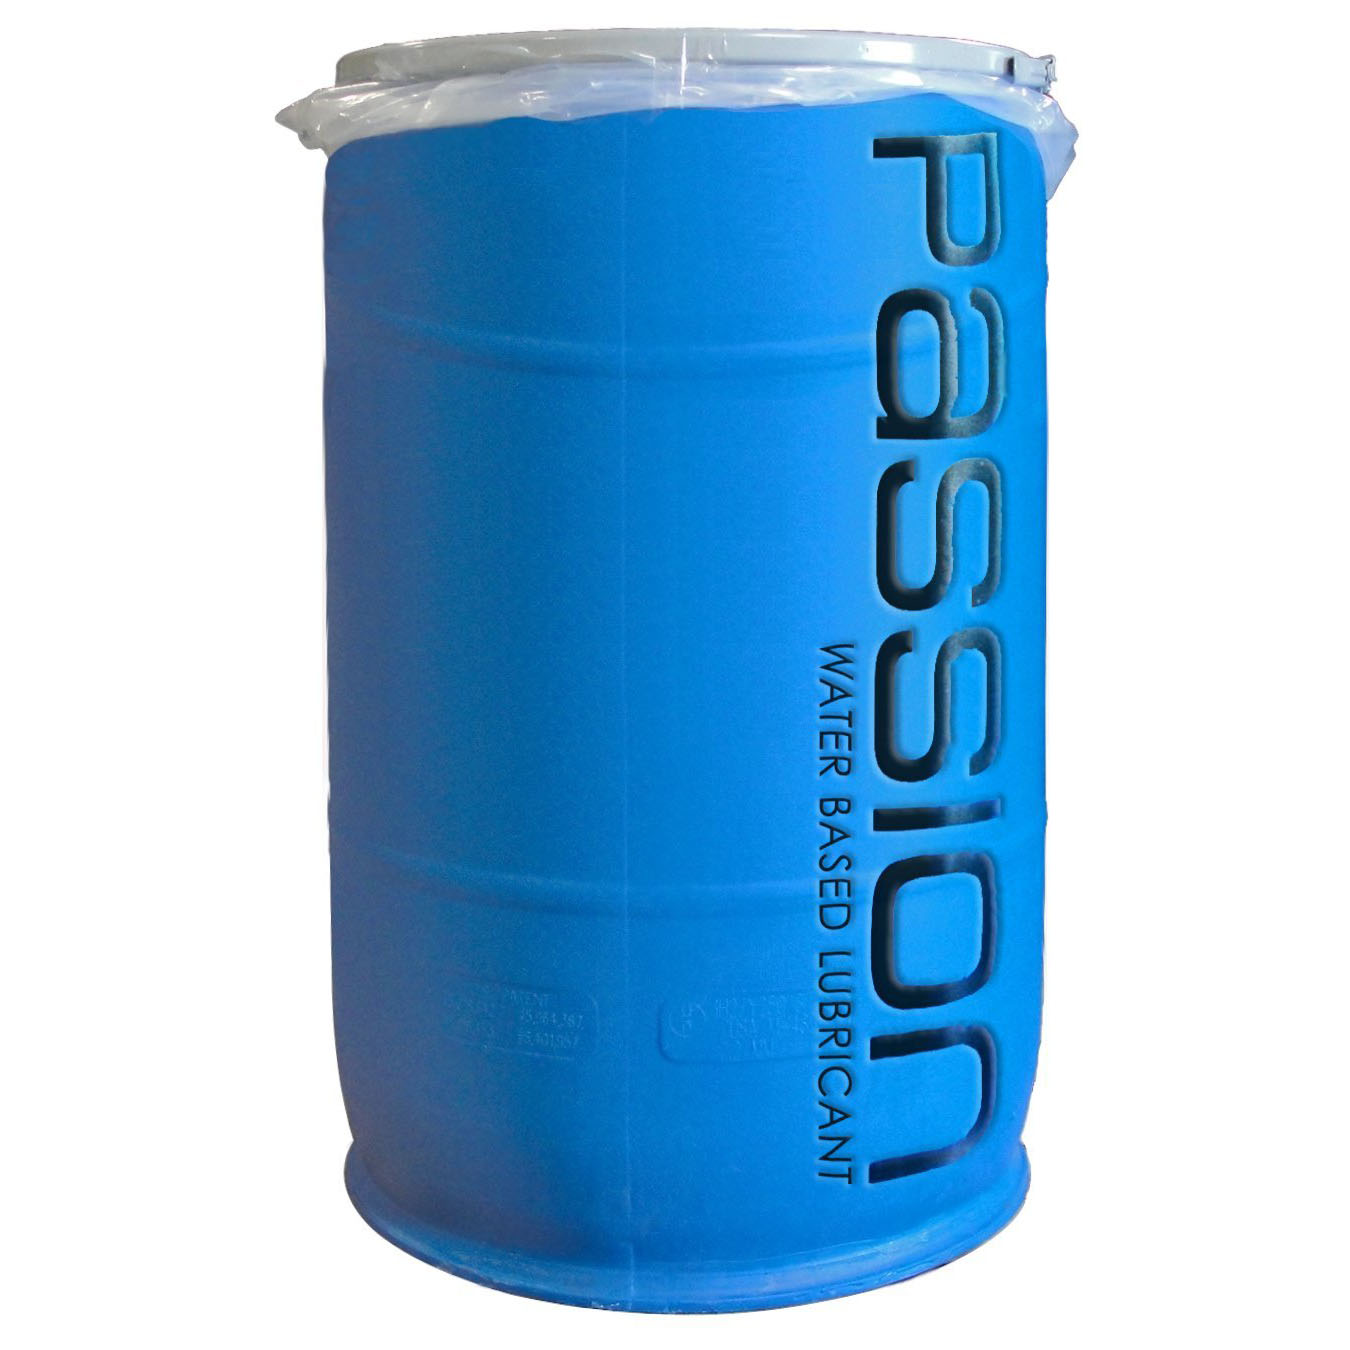 55 Gallon Drum of Lube - OMG Gimme